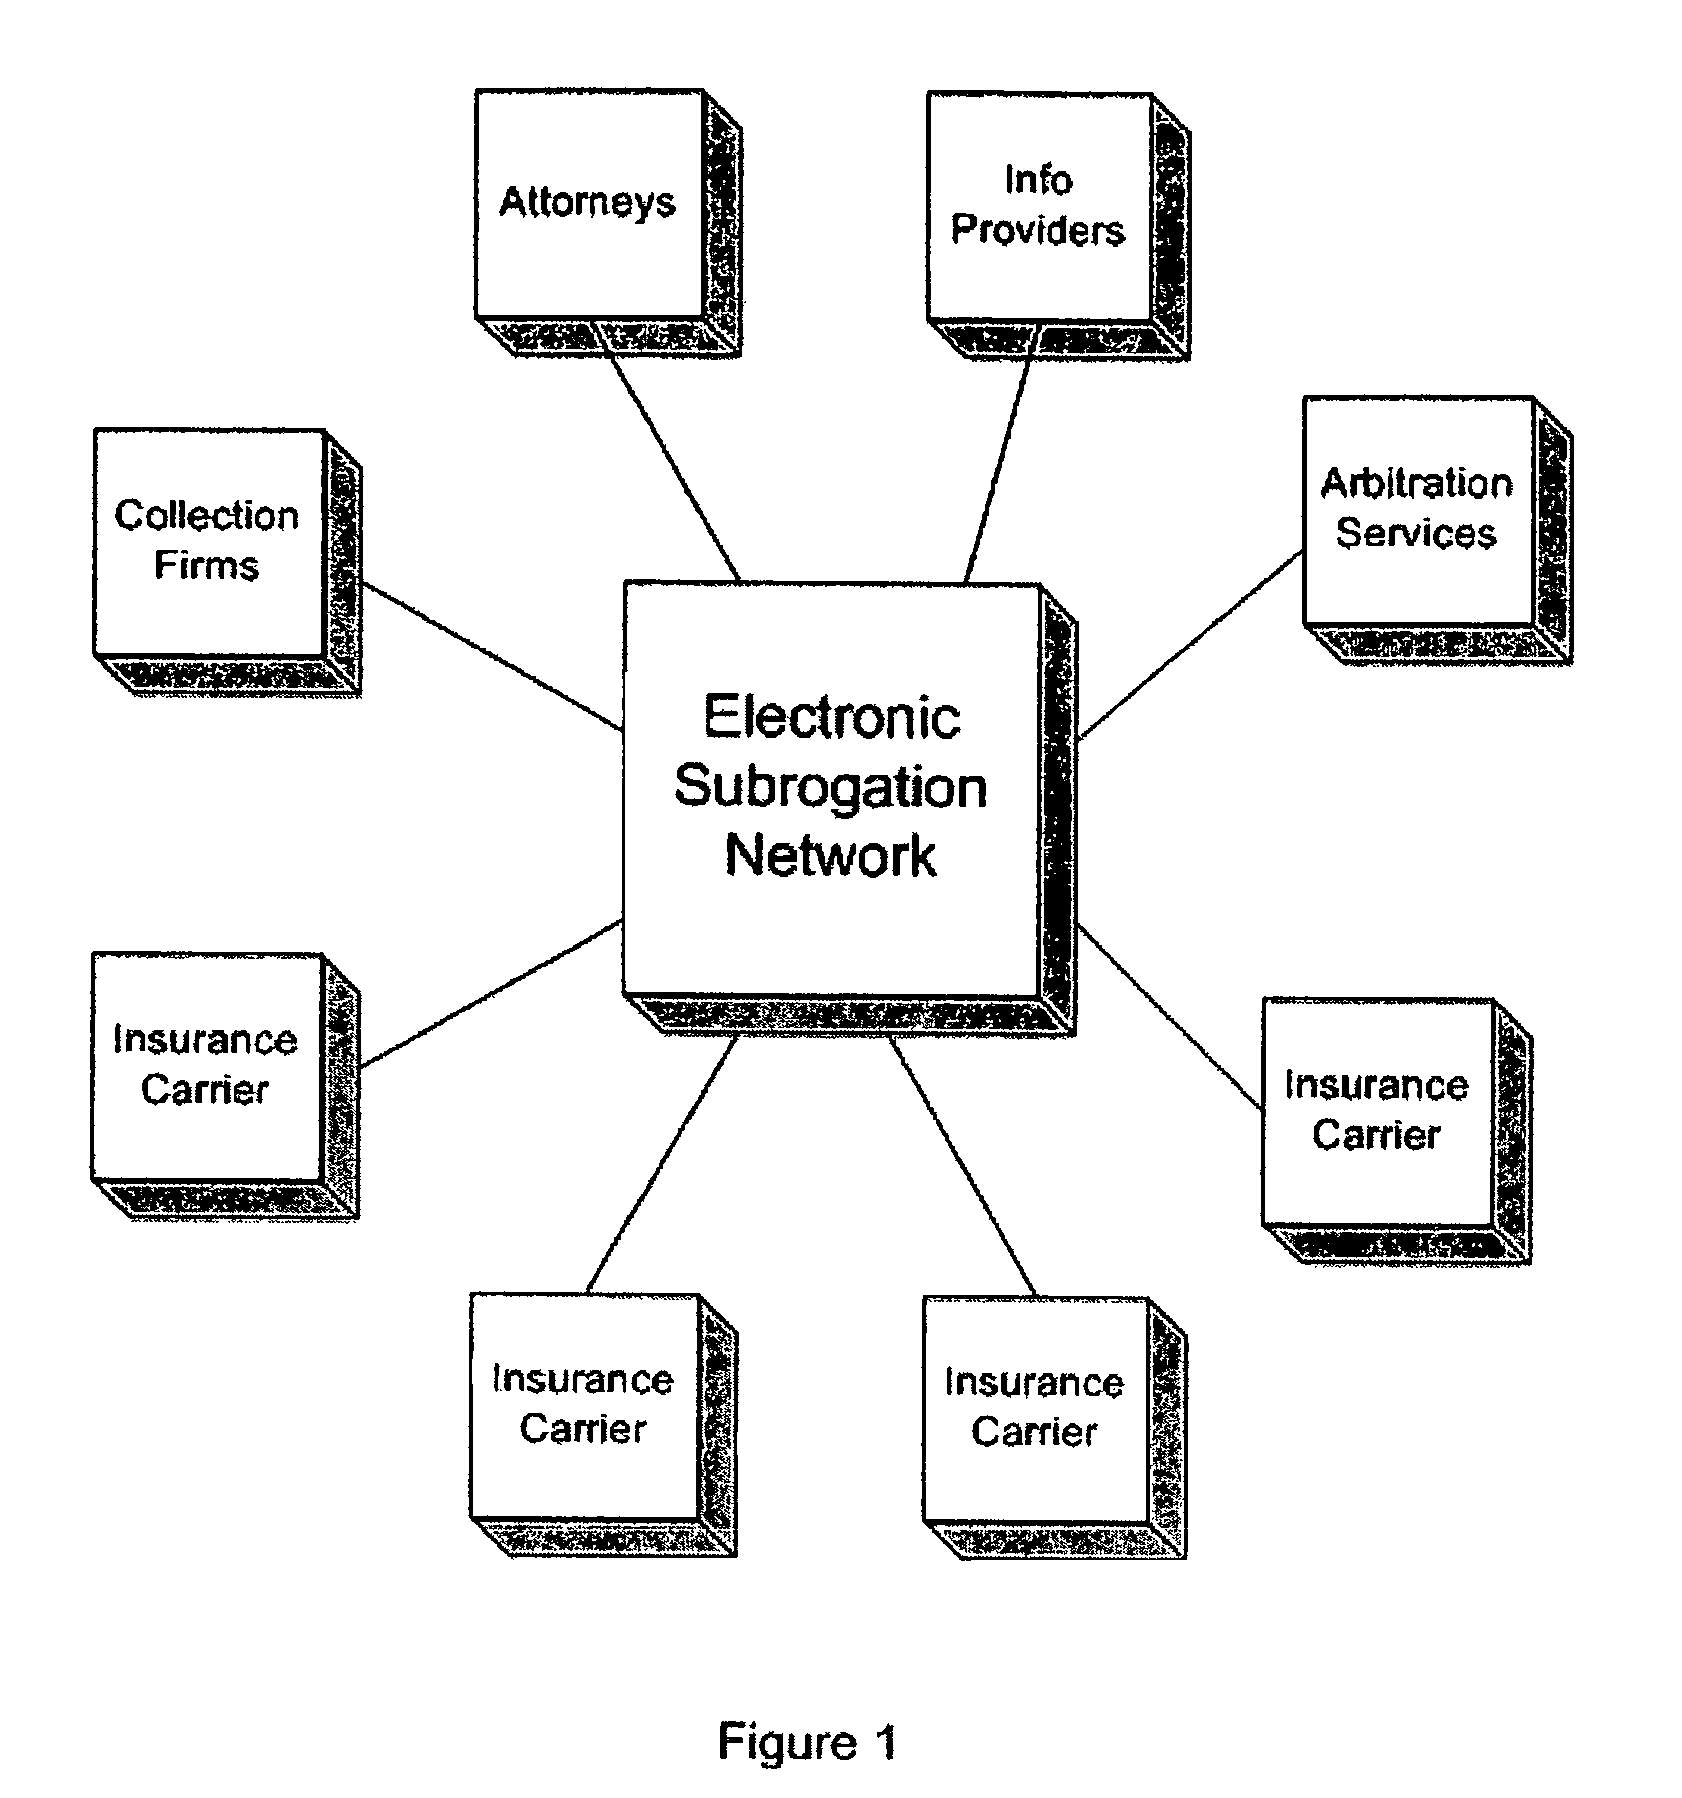 System and process for electronic subrogation, inter-organization workflow management, inter-organization transaction processing and optimized web-based user interaction